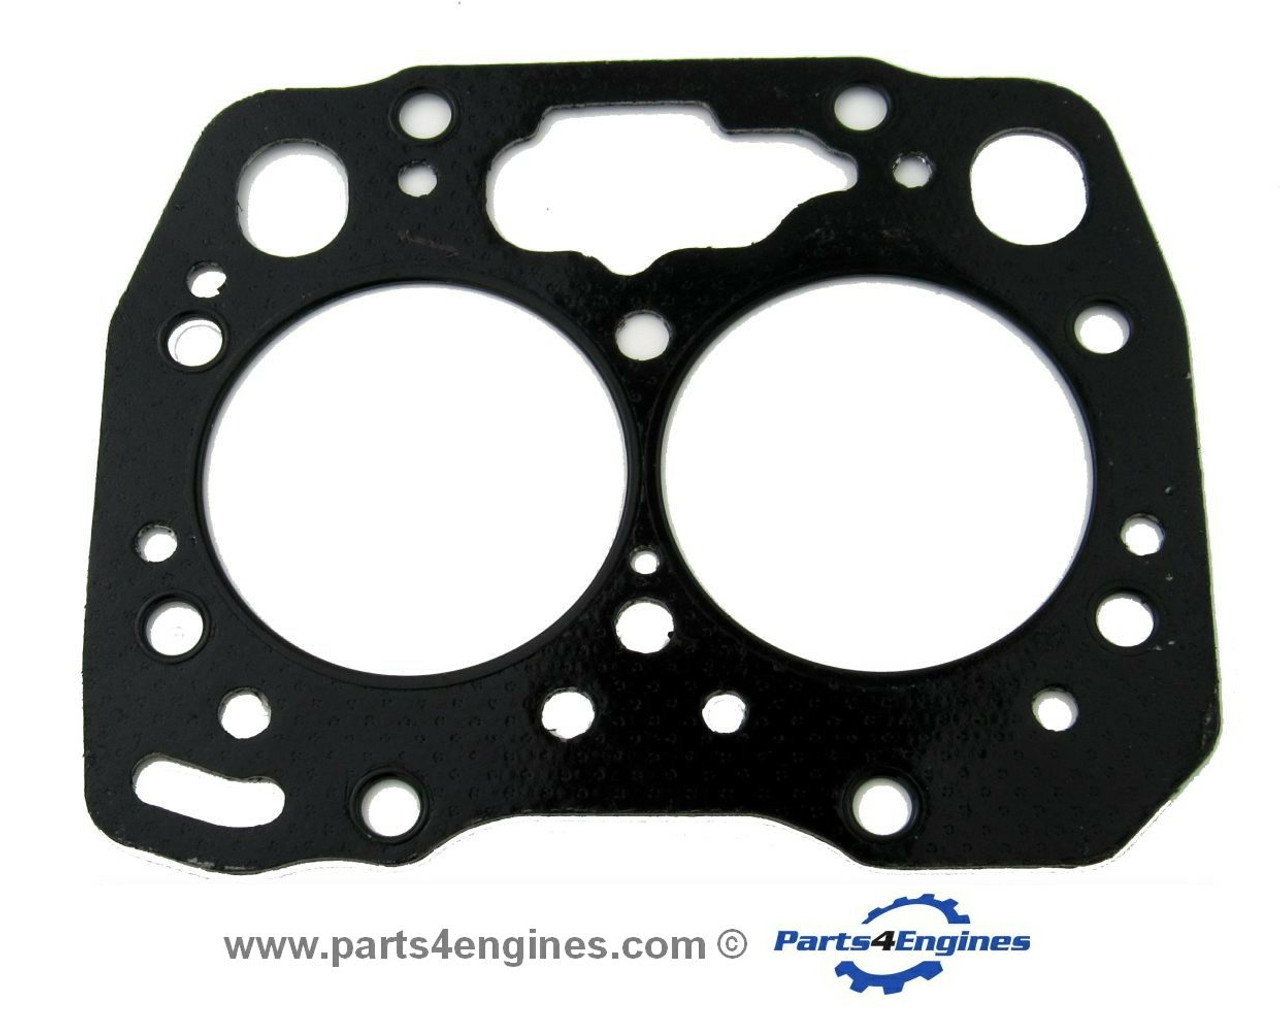 Perkins 402F-05 Head gasket, from parts4engines.com